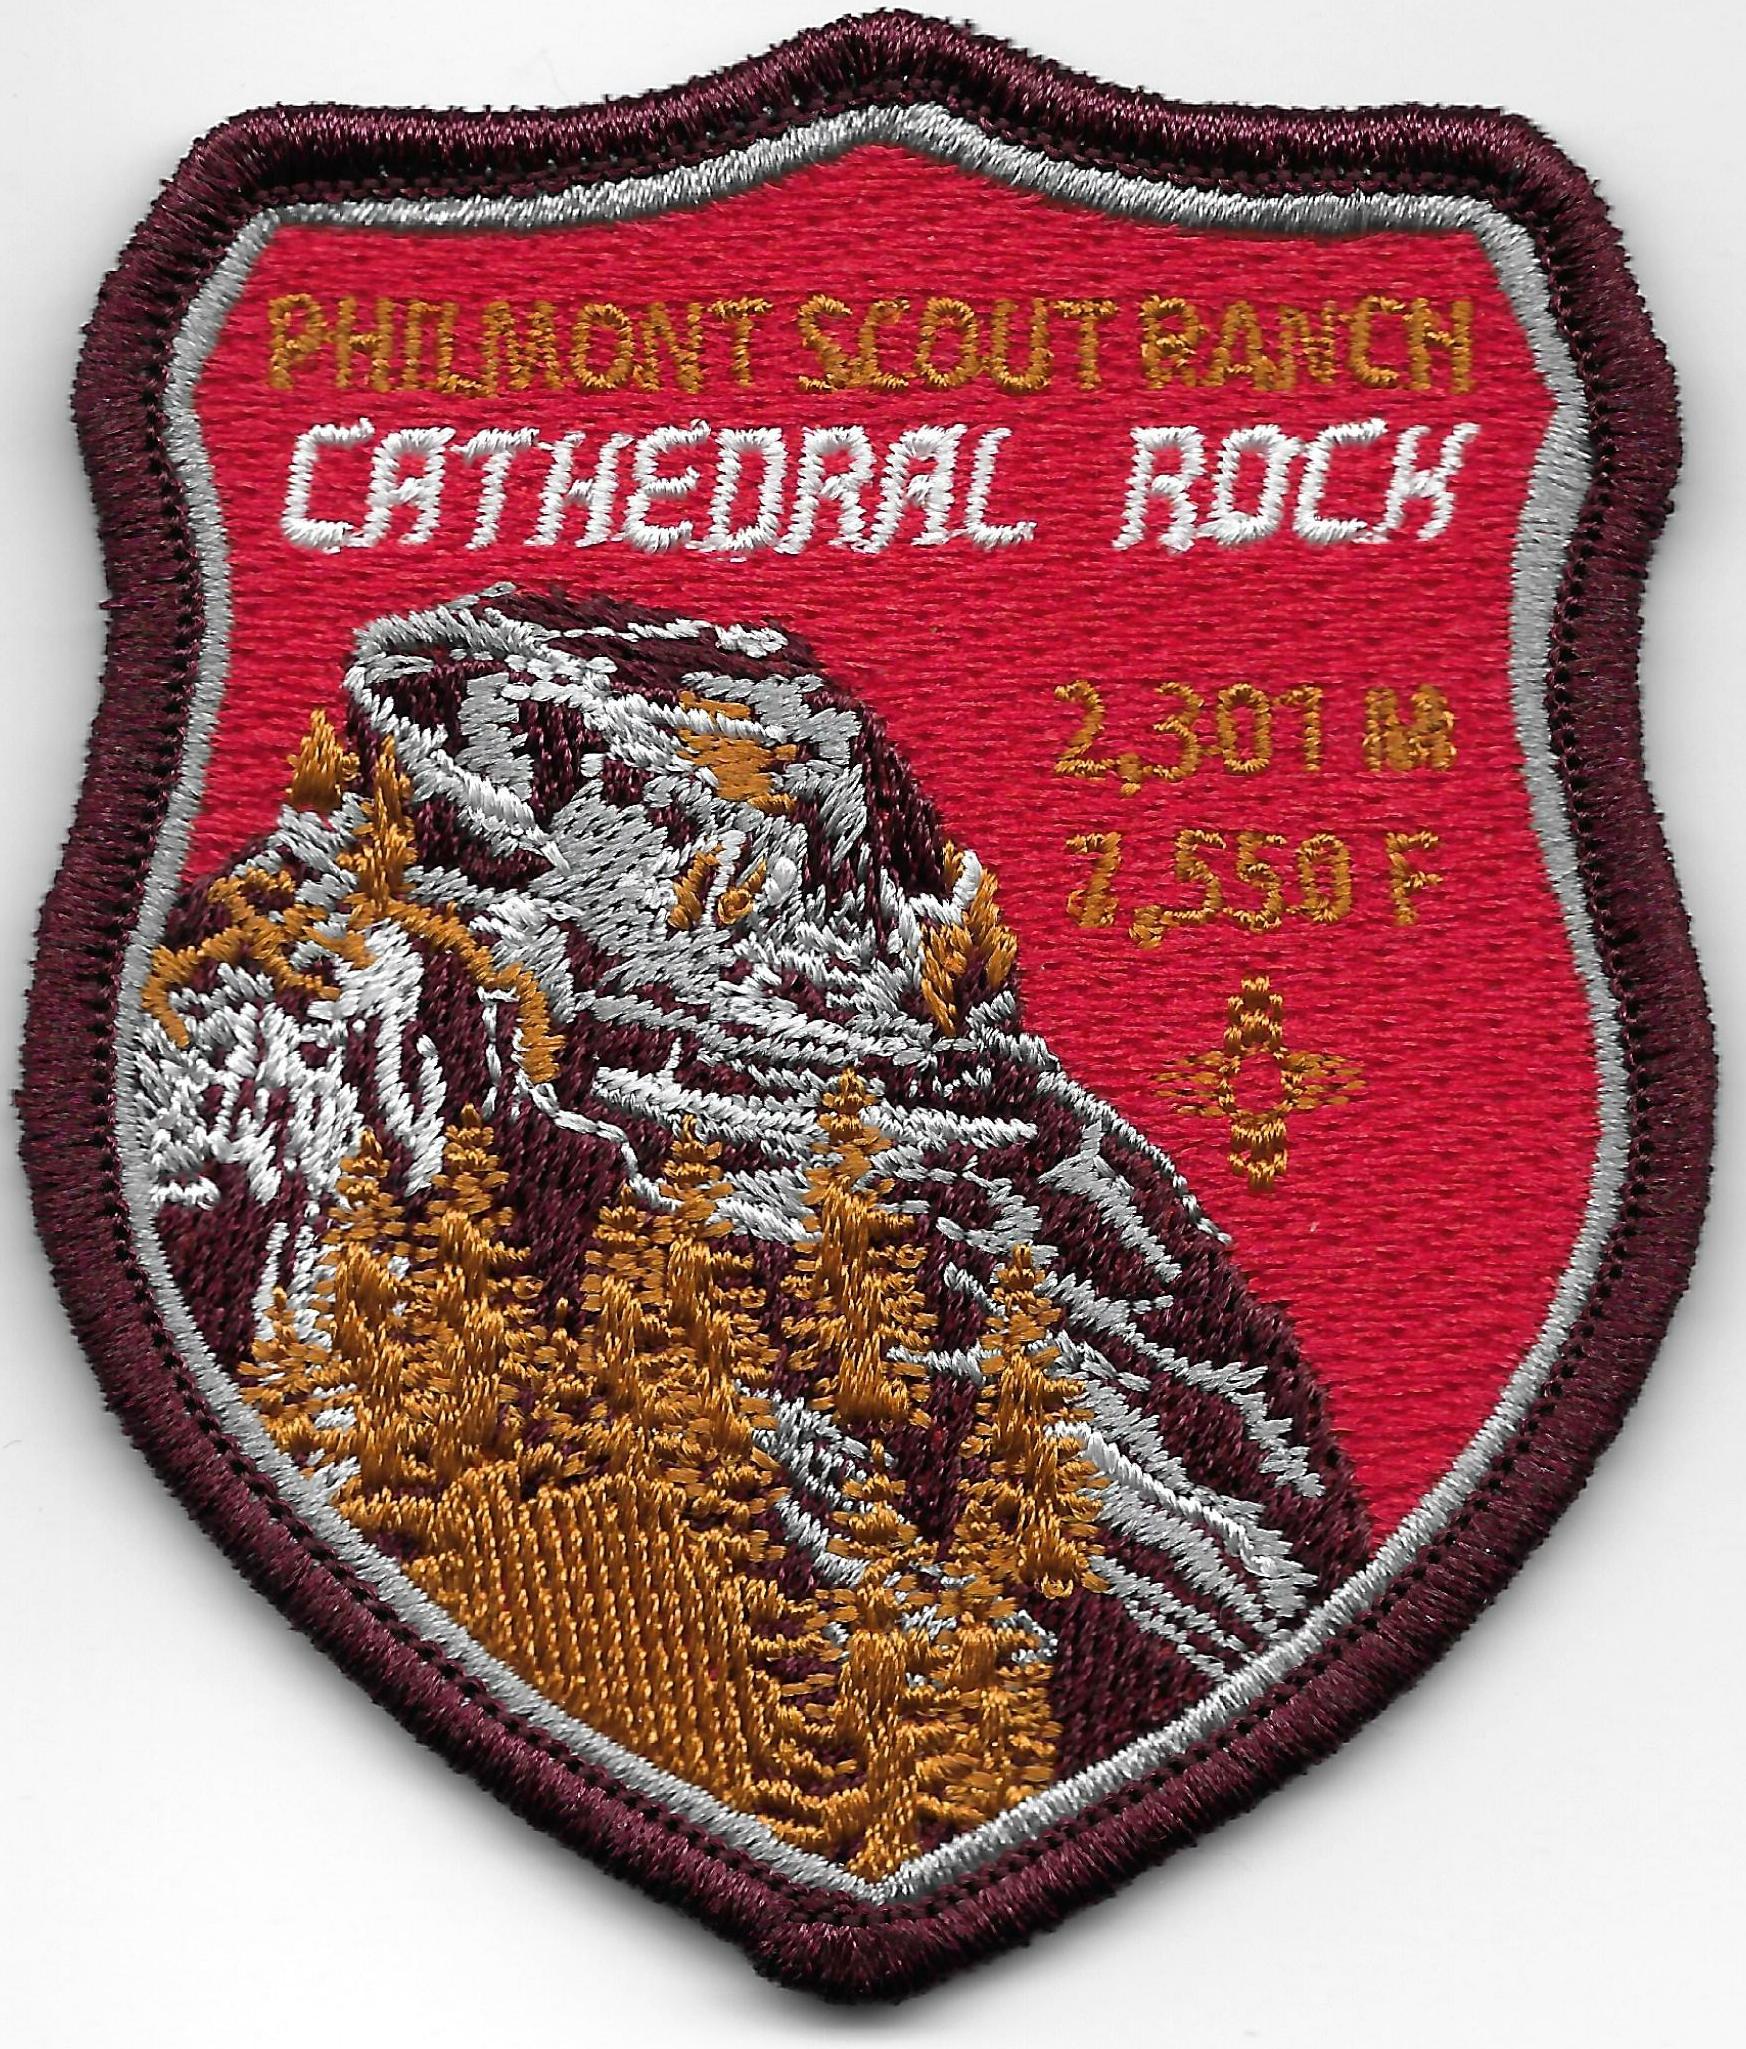 Cathedral Rock patch image